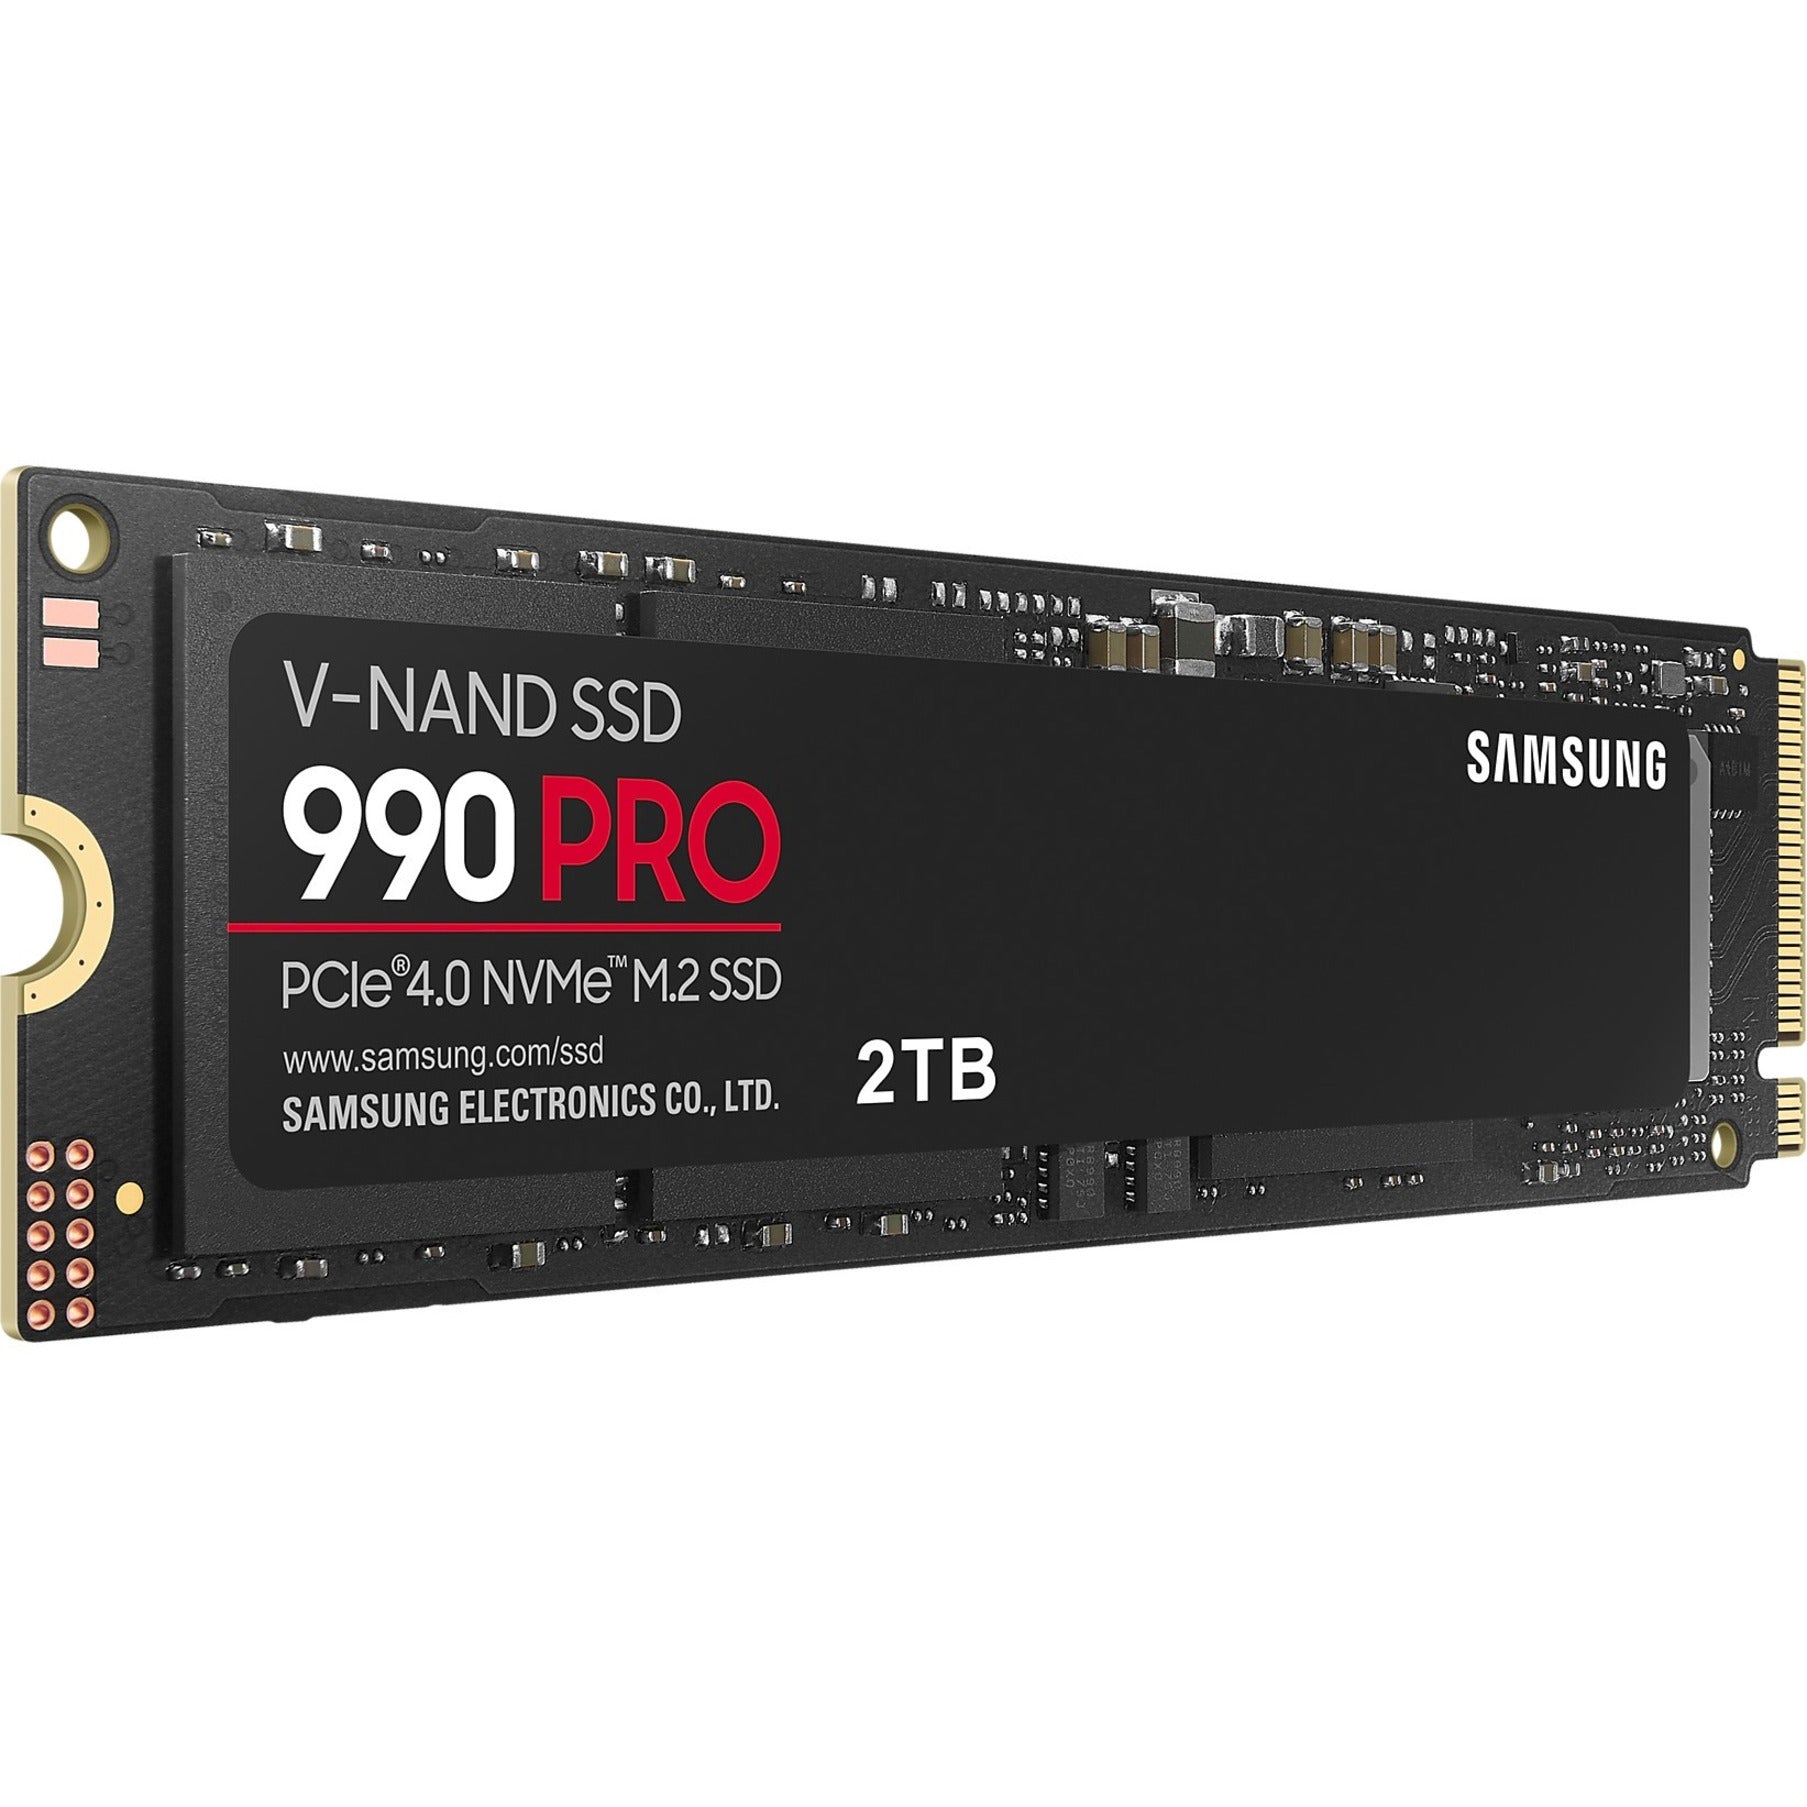 Samsung MZ-V9P2T0B/AM 990 PRO PCIe 4.0 NVMe SSD 2TB, High-Speed Storage Solution for Gaming Consoles and Desktop PCs